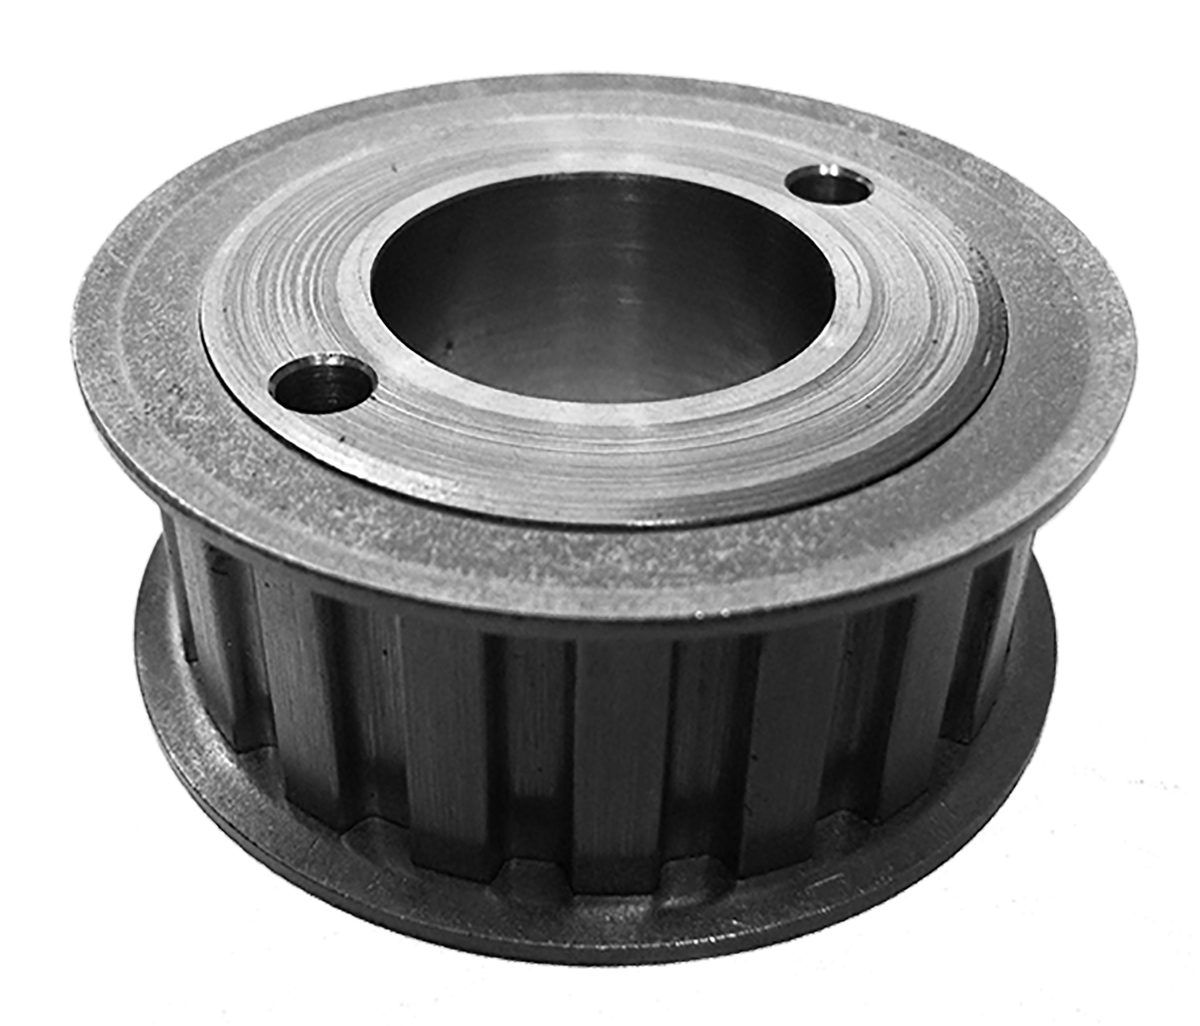 72LP075 - Cast Iron Imperial Pitch Pulleys